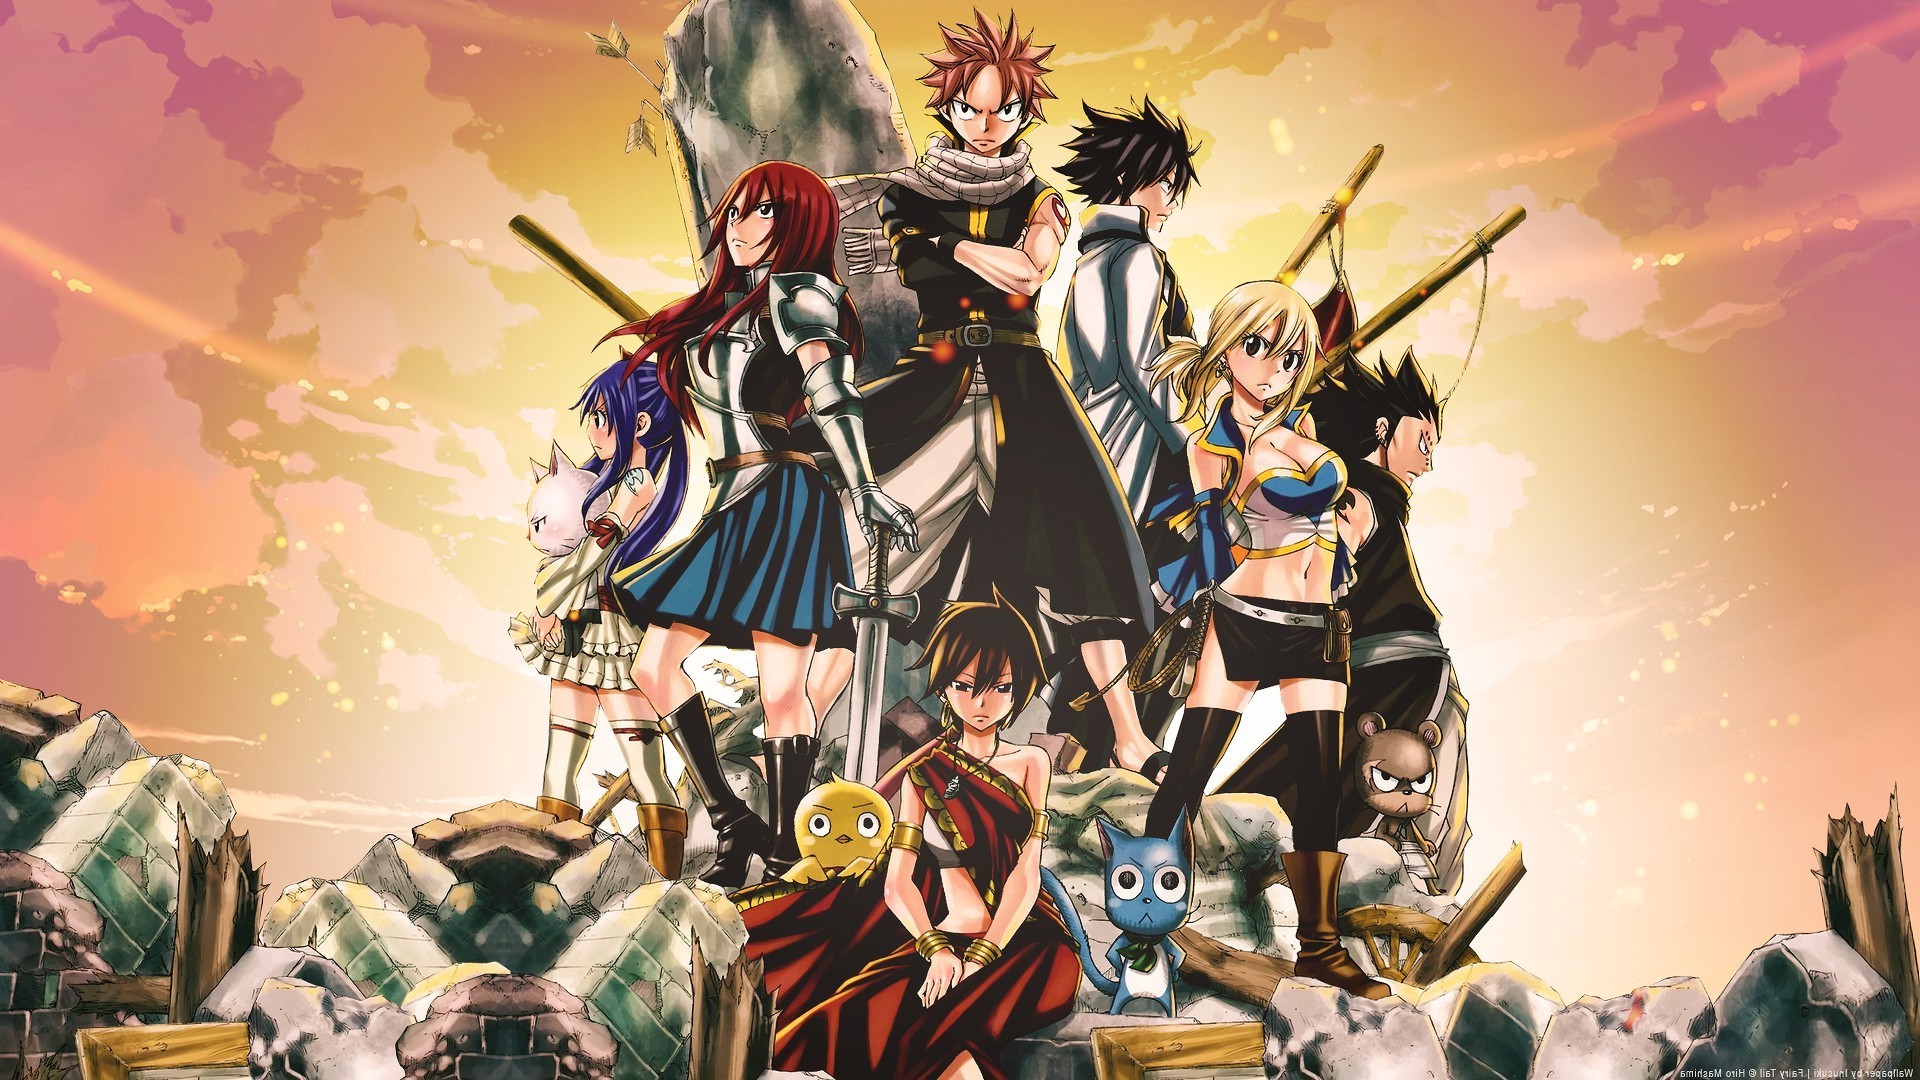 1920x1080 Fairy Tail 7 Dragon Slayer Wallpapers Background As Wallpaper HD